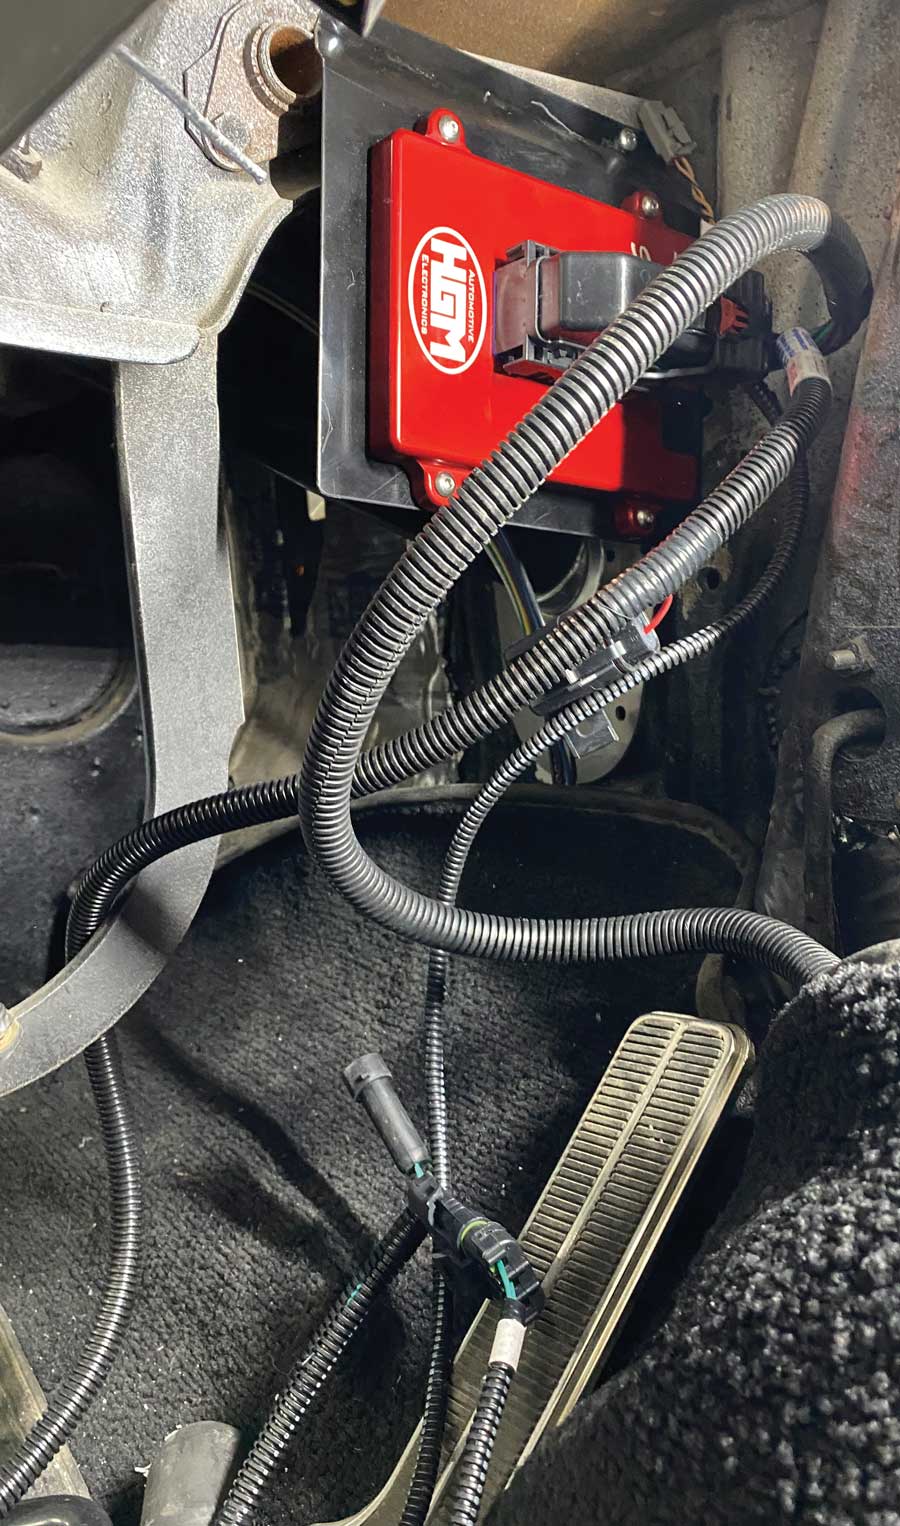 The bracket/TCU were attached to the right side of the brake pedal